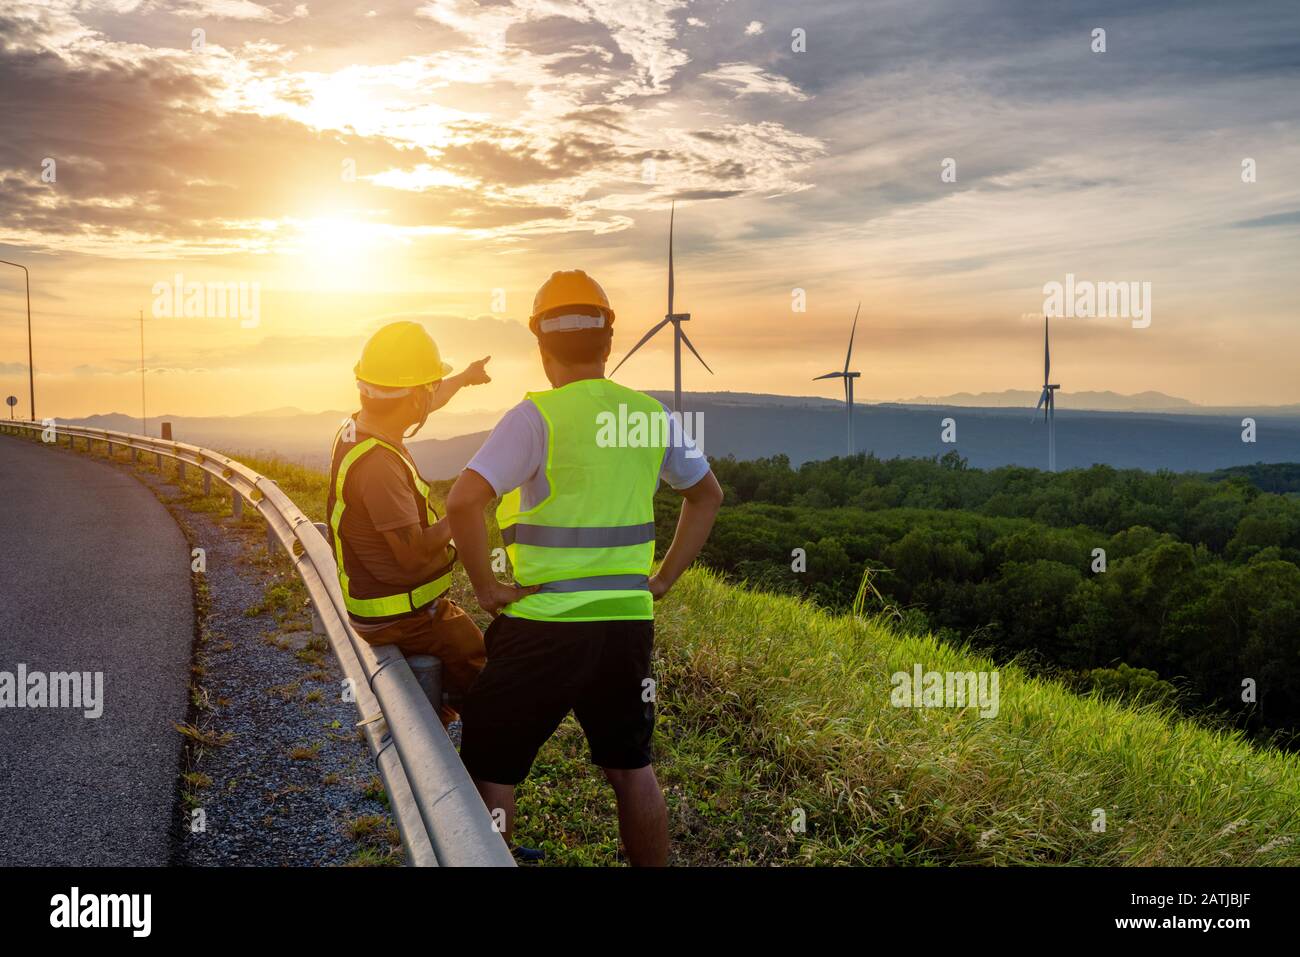 Two engineers consulted to fix and repair wind turbines to generate electricity with natural energy. Stock Photo